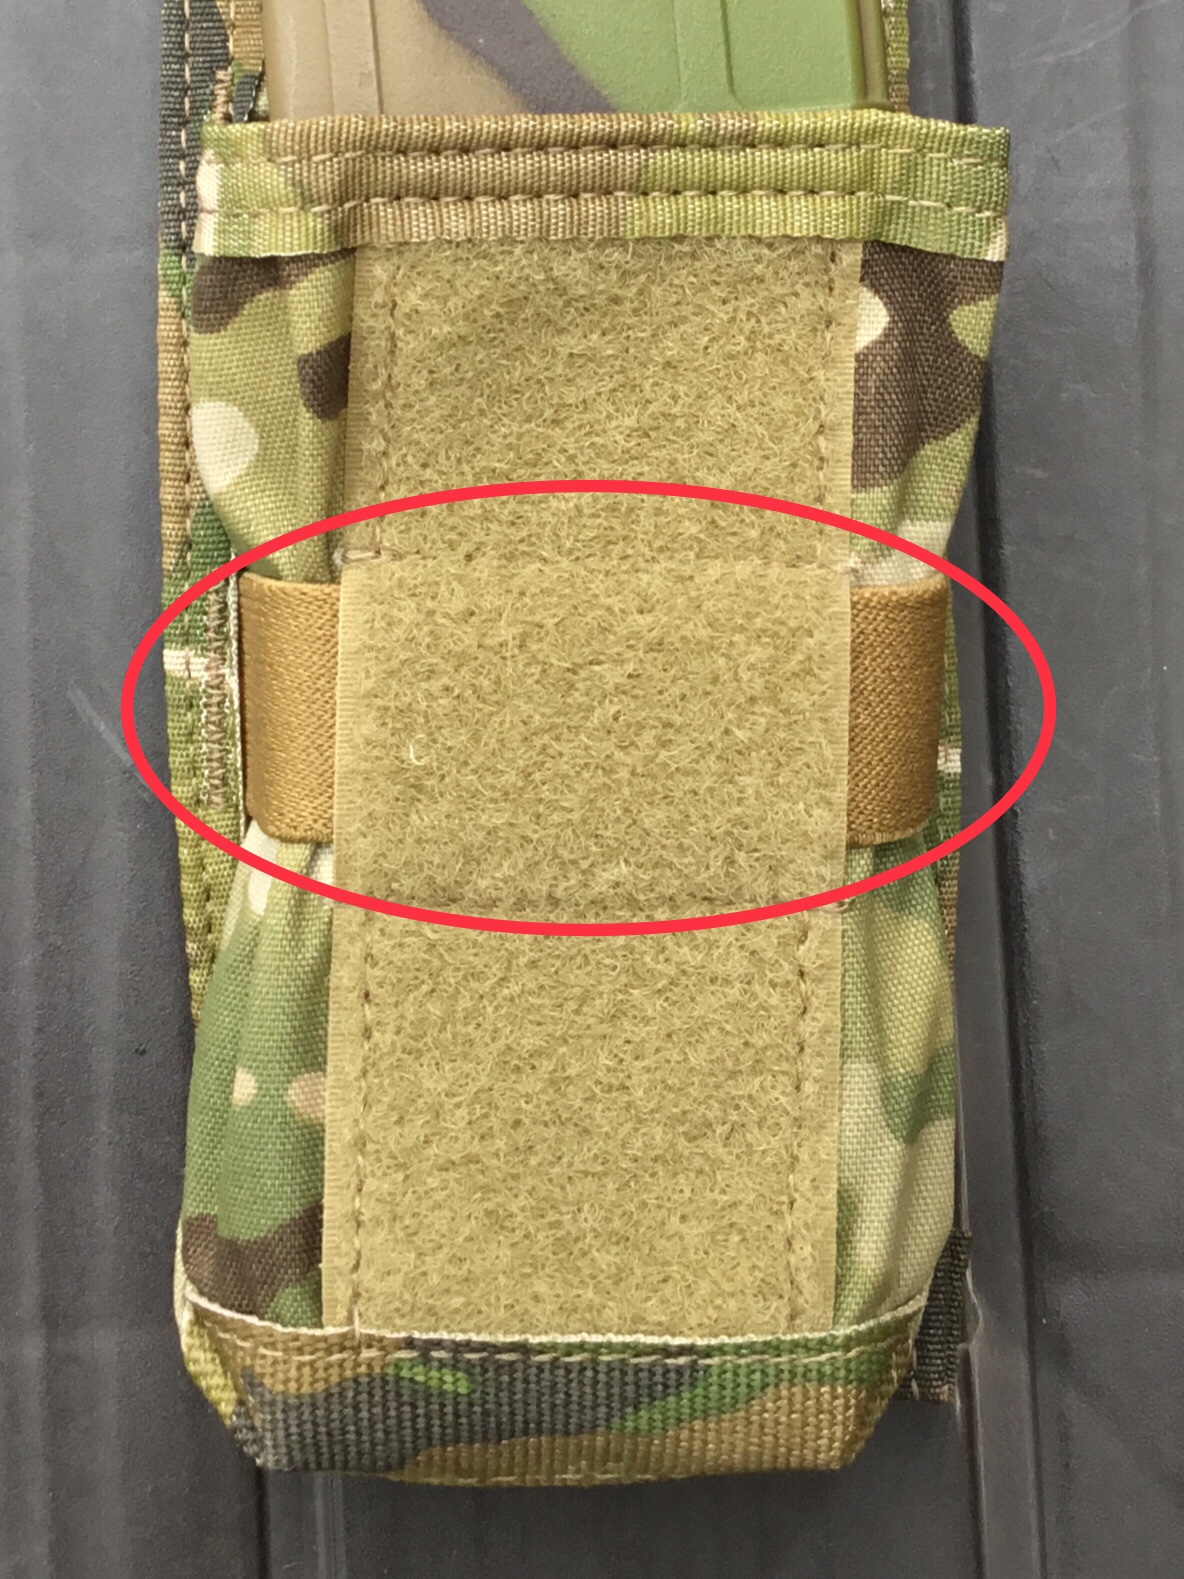 REVIEW: Crye Precision 330D 556 Double Mag Pouch – The Reptile House